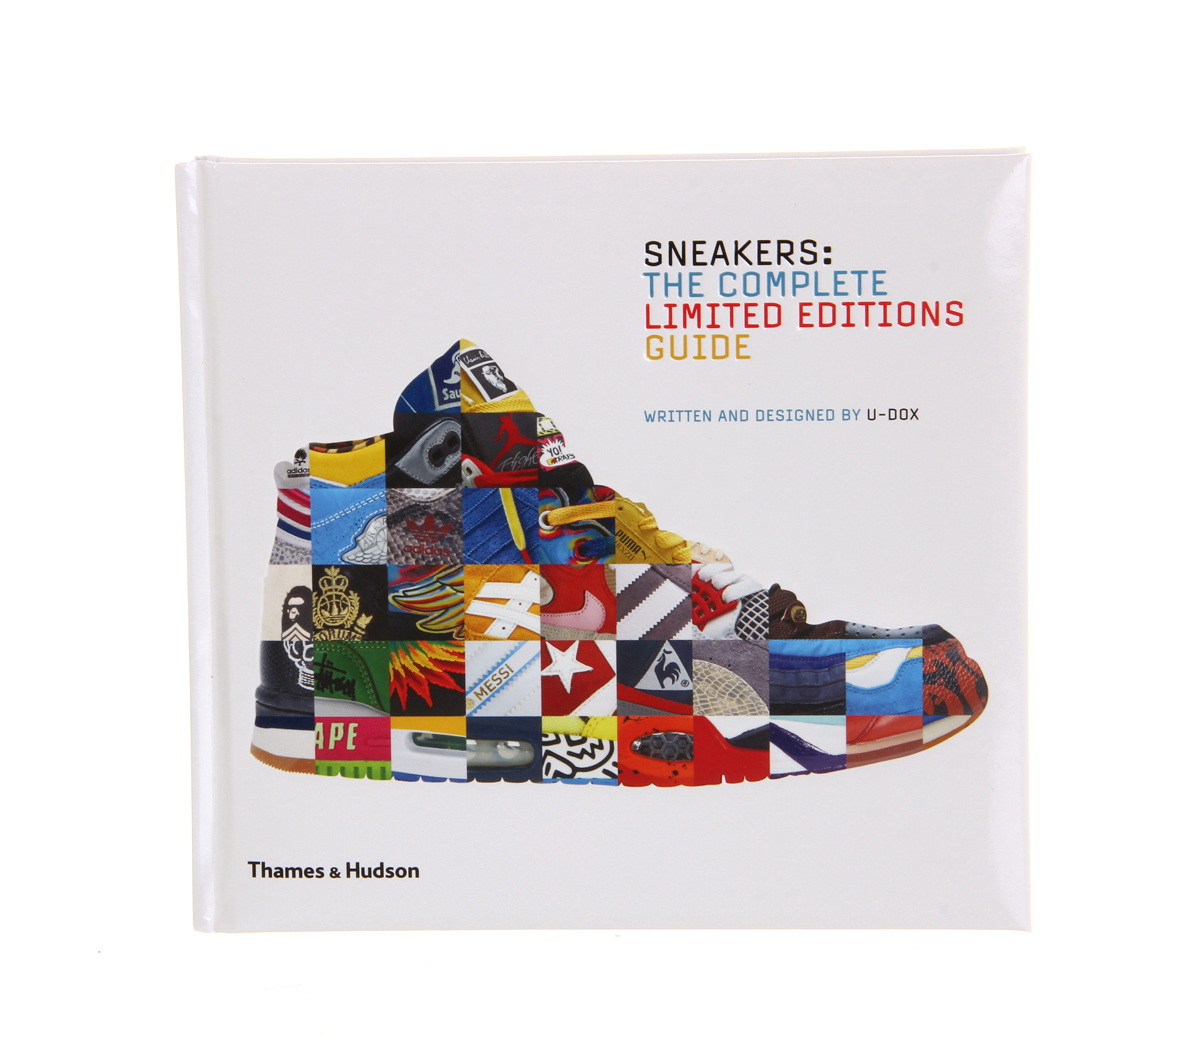 thameshudsonSneakers: The Complete Limited Editions GuideLimited Edition Guide